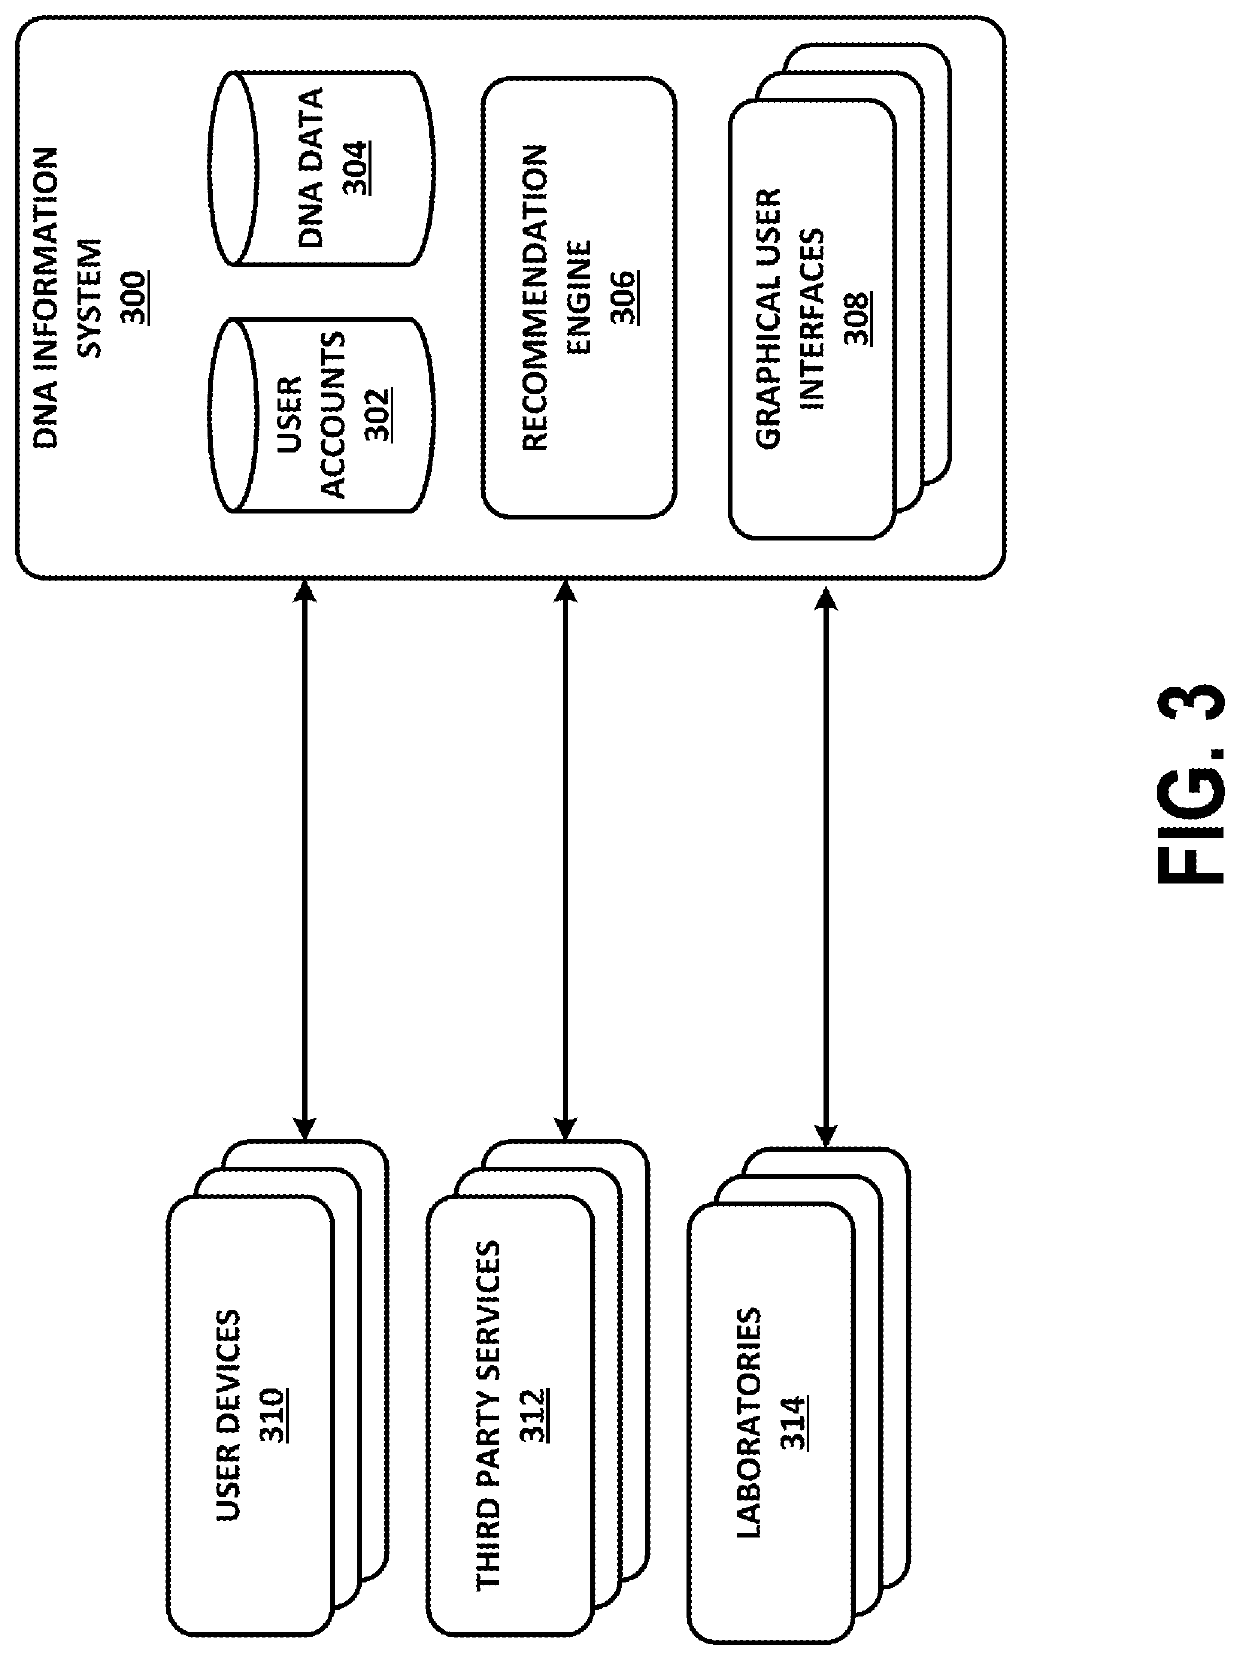 Graphical User Interfaces for Determining Personalized Endocannabinoid Genotypes and Associated Recommendations